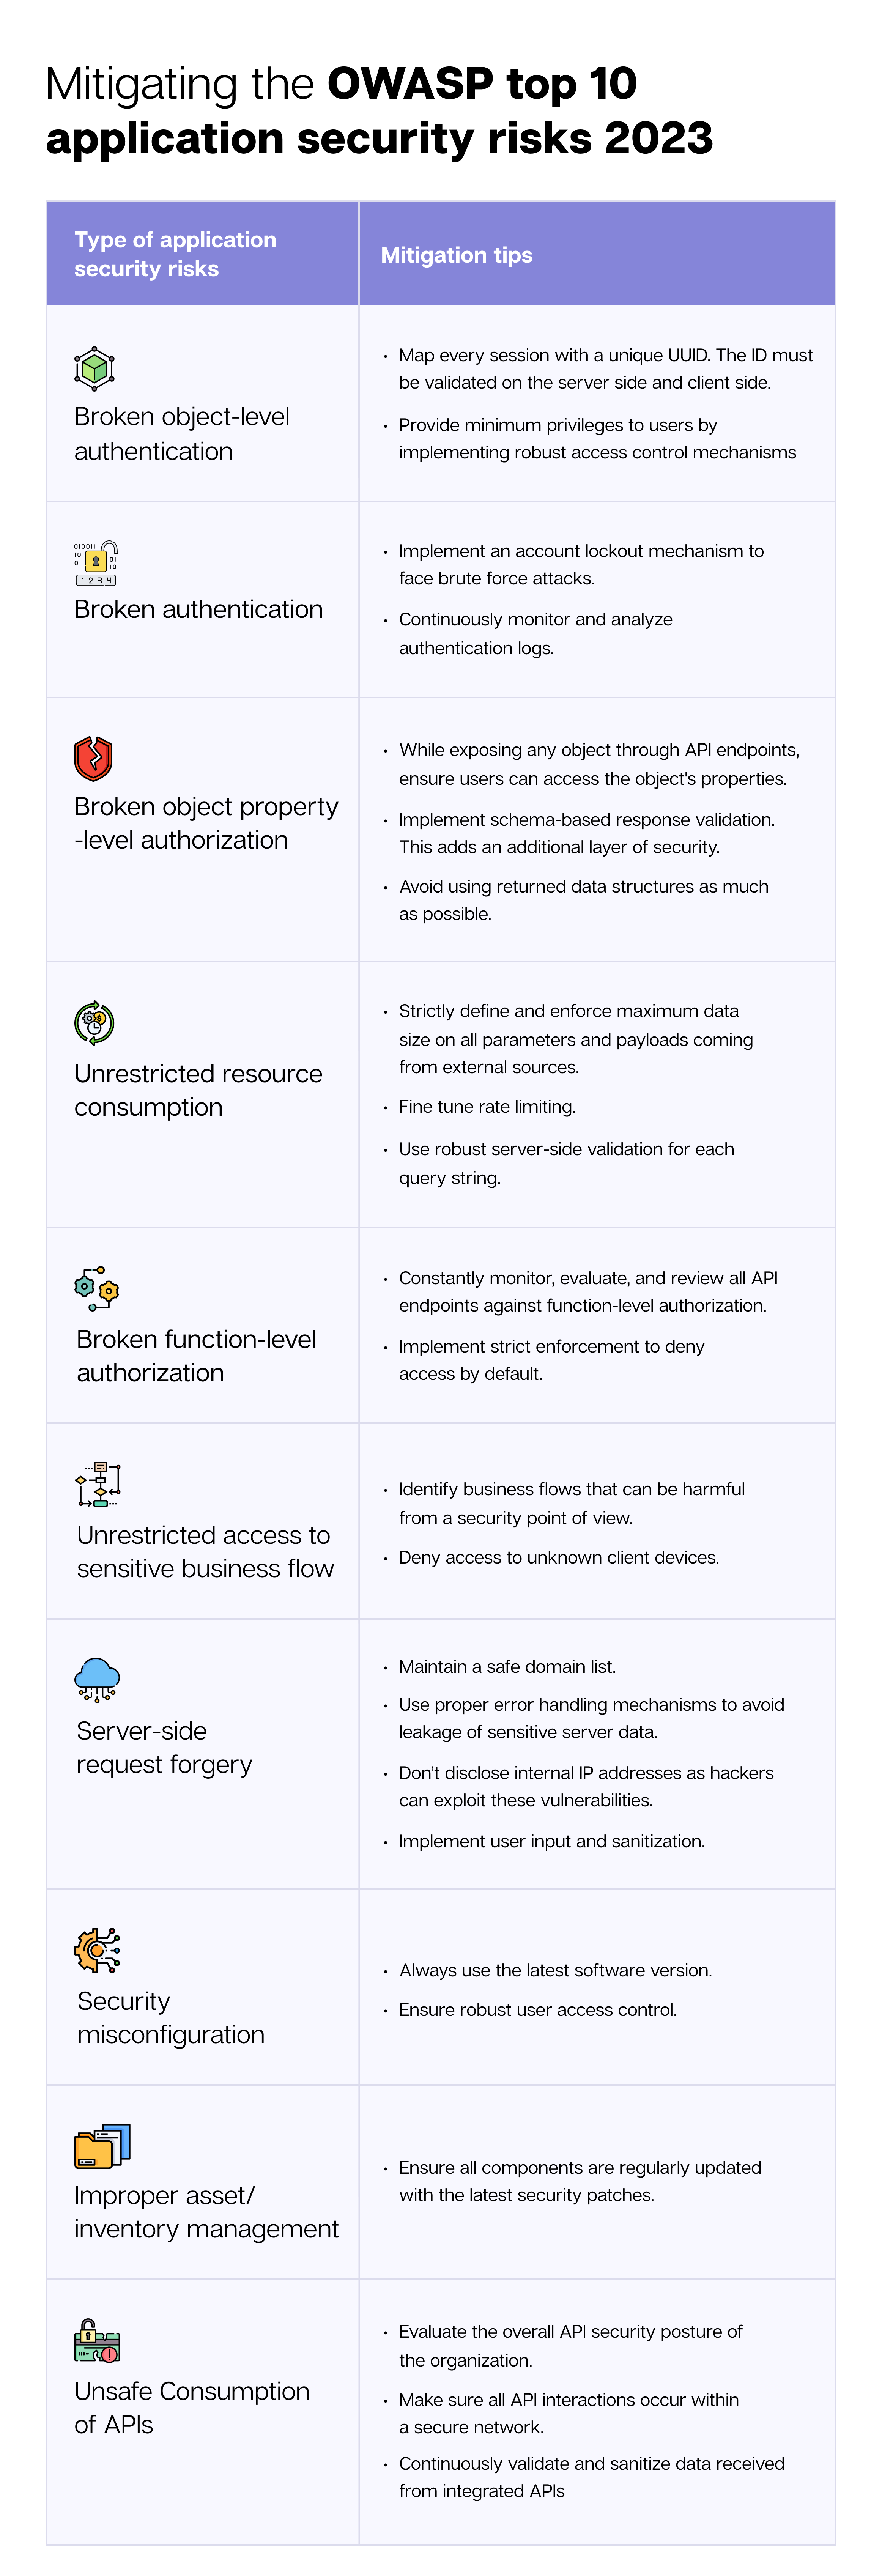 A detailed template with the ten types of application security risks and mitigation tips